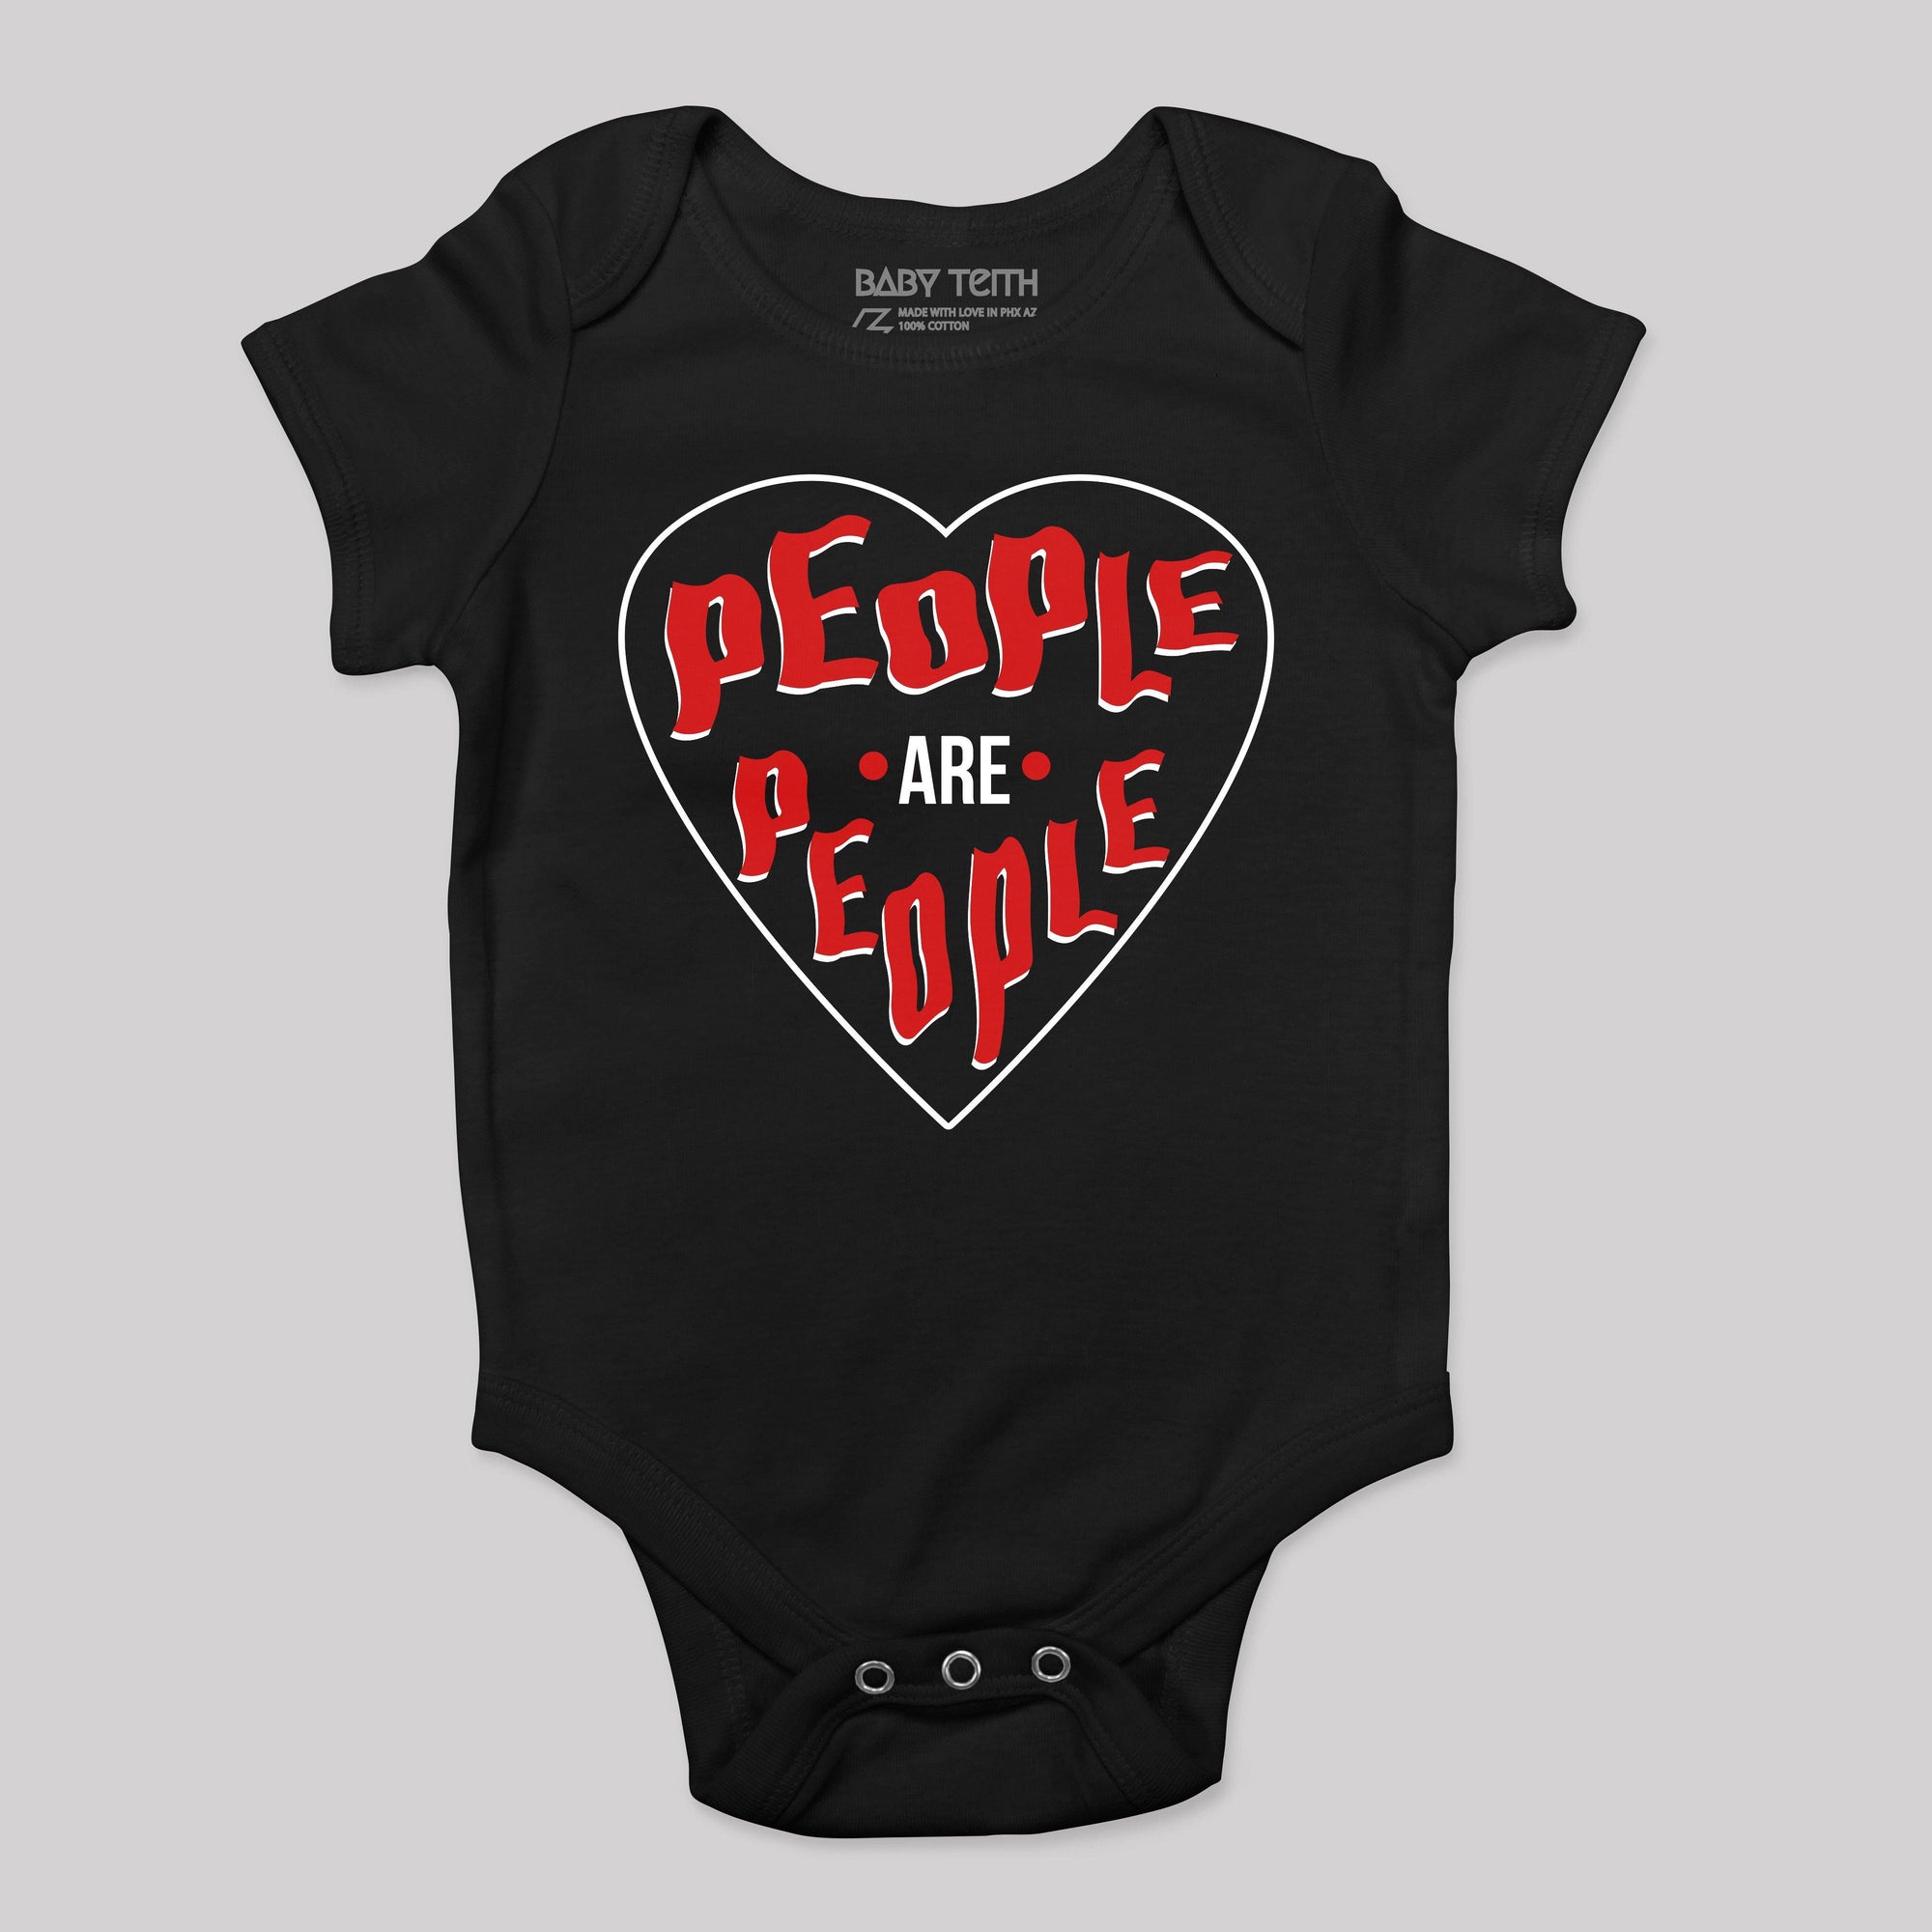 &quot;People Are People&quot; Sleeve Baby Bodysuit - Baby Teith